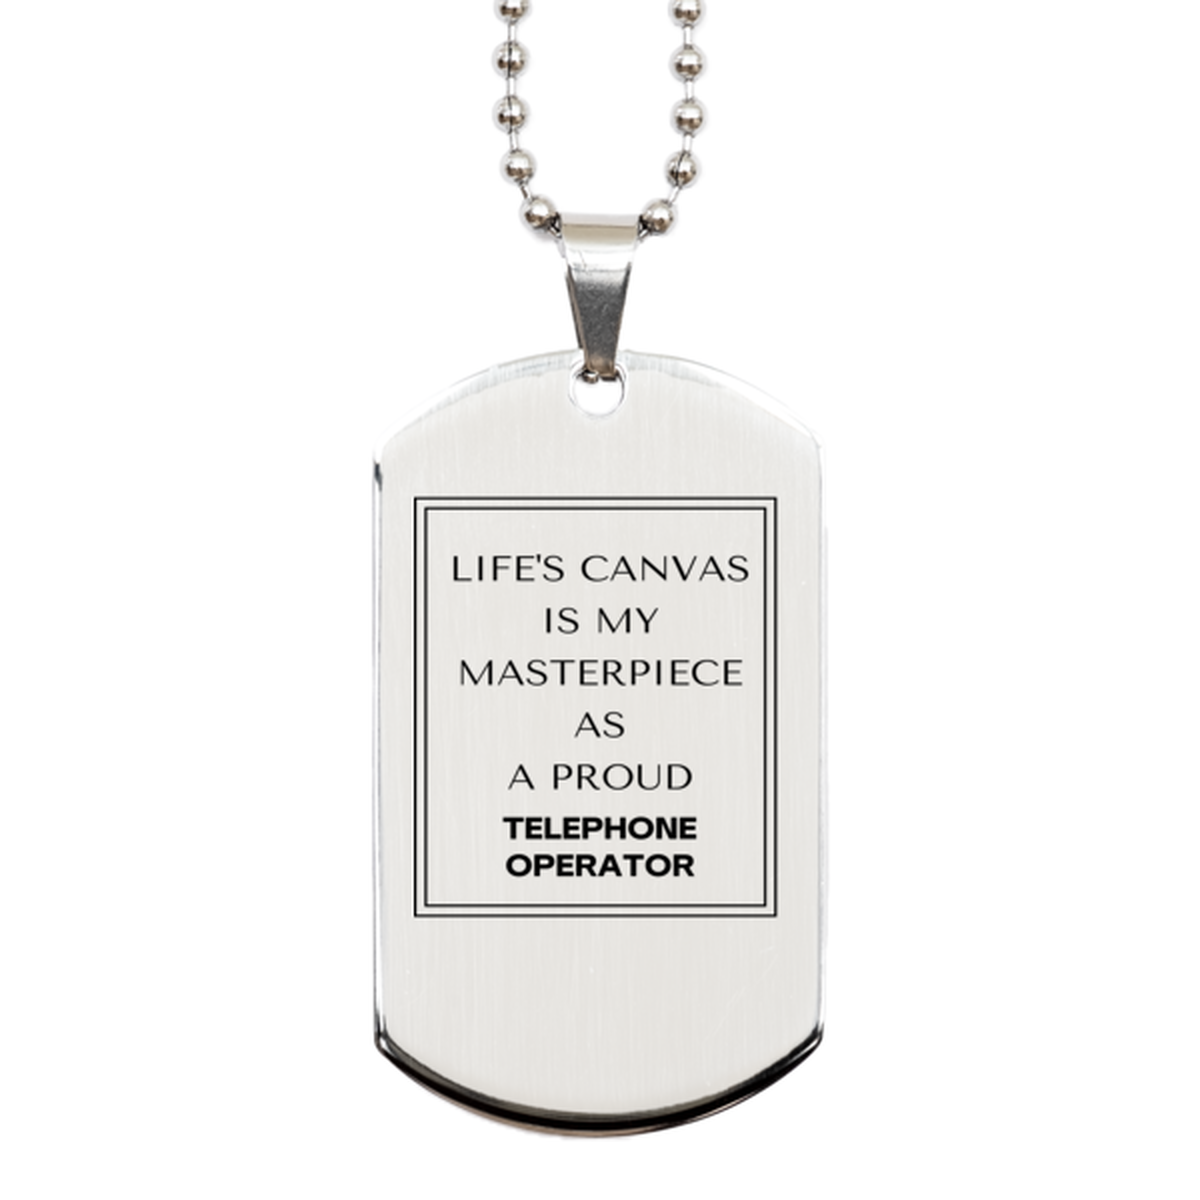 Proud Telephone Operator Gifts, Life's canvas is my masterpiece, Epic Birthday Christmas Unique Silver Dog Tag For Telephone Operator, Coworkers, Men, Women, Friends